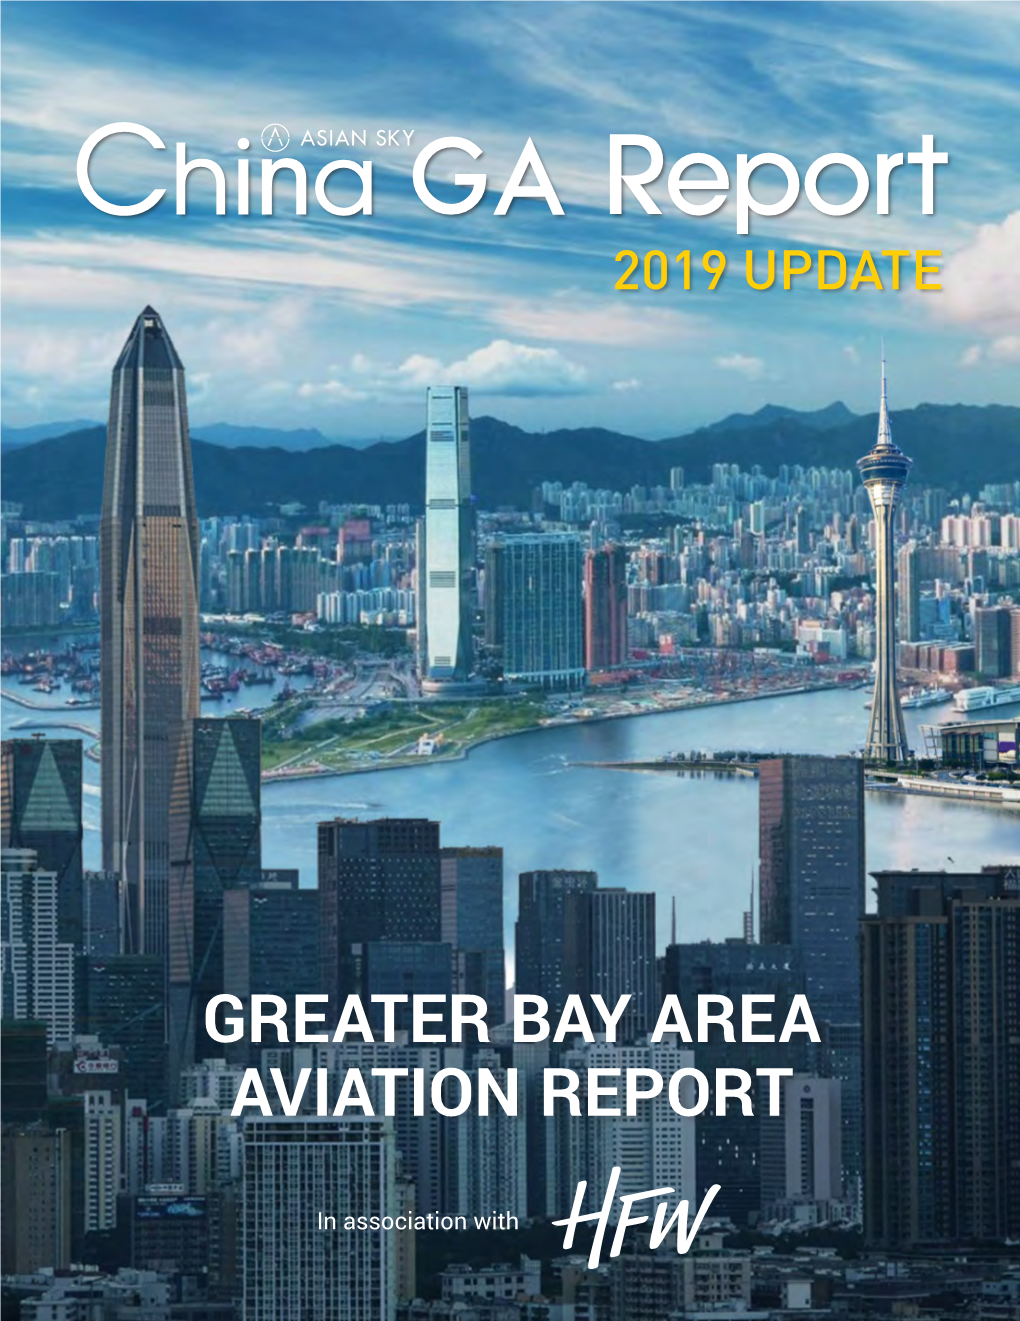 Greater Bay Area Aviation Report